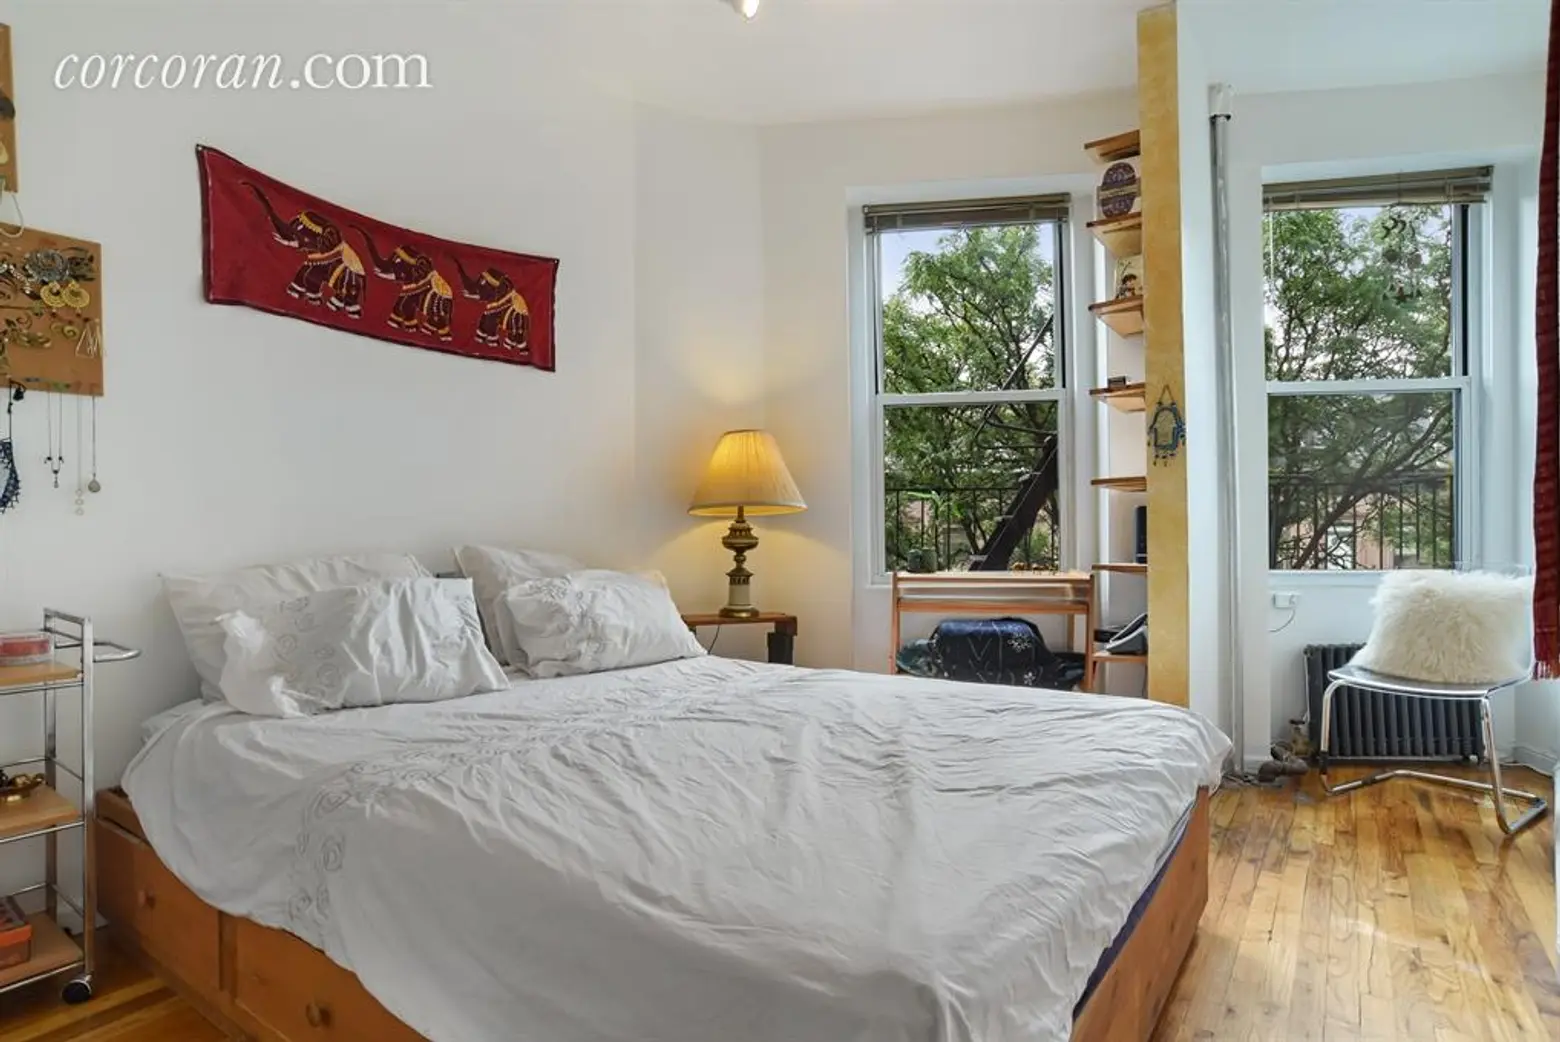 130 Prospect Place, Prospect Heights, Co-ops, Cool listings, Brooklyn, Brooklyn apartments under a million